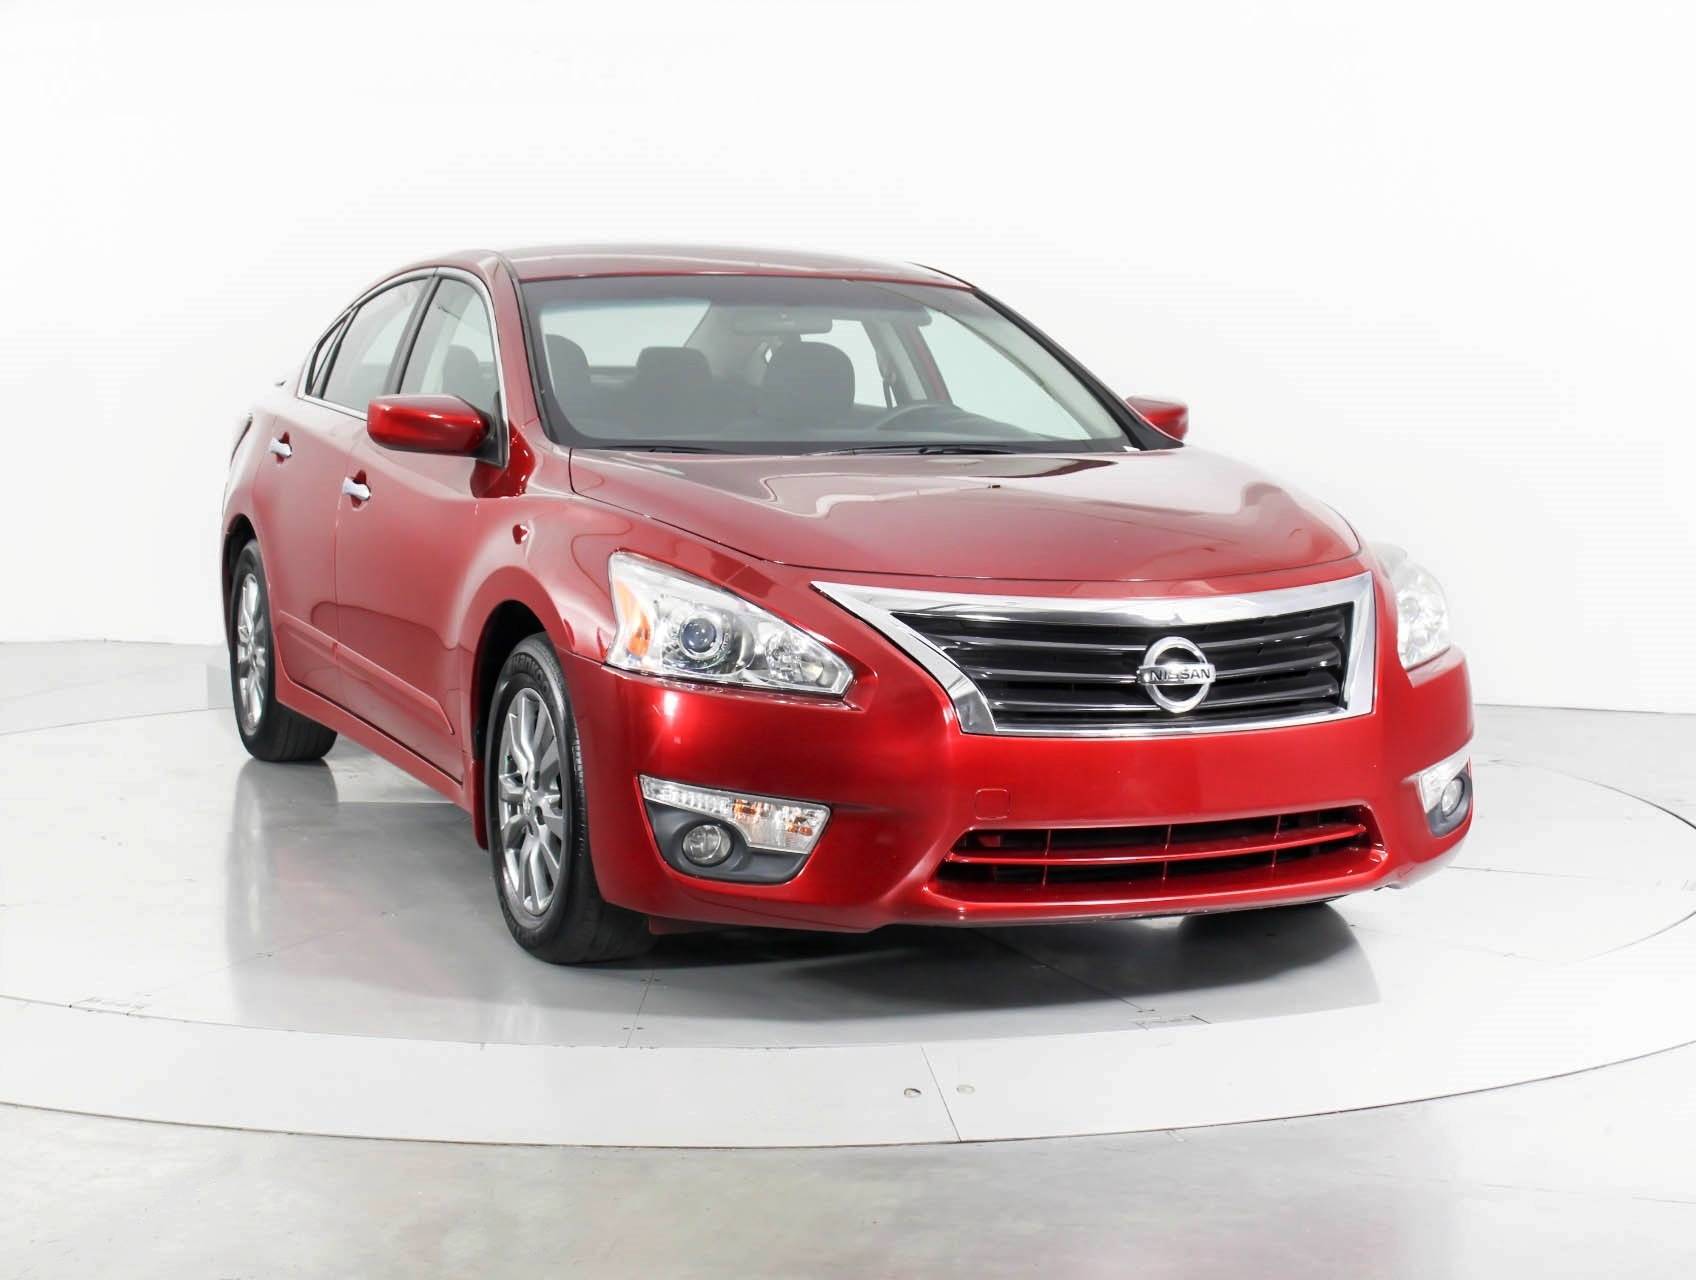 Florida Fine Cars - Used NISSAN ALTIMA 2015 WEST PALM Spedial Edition